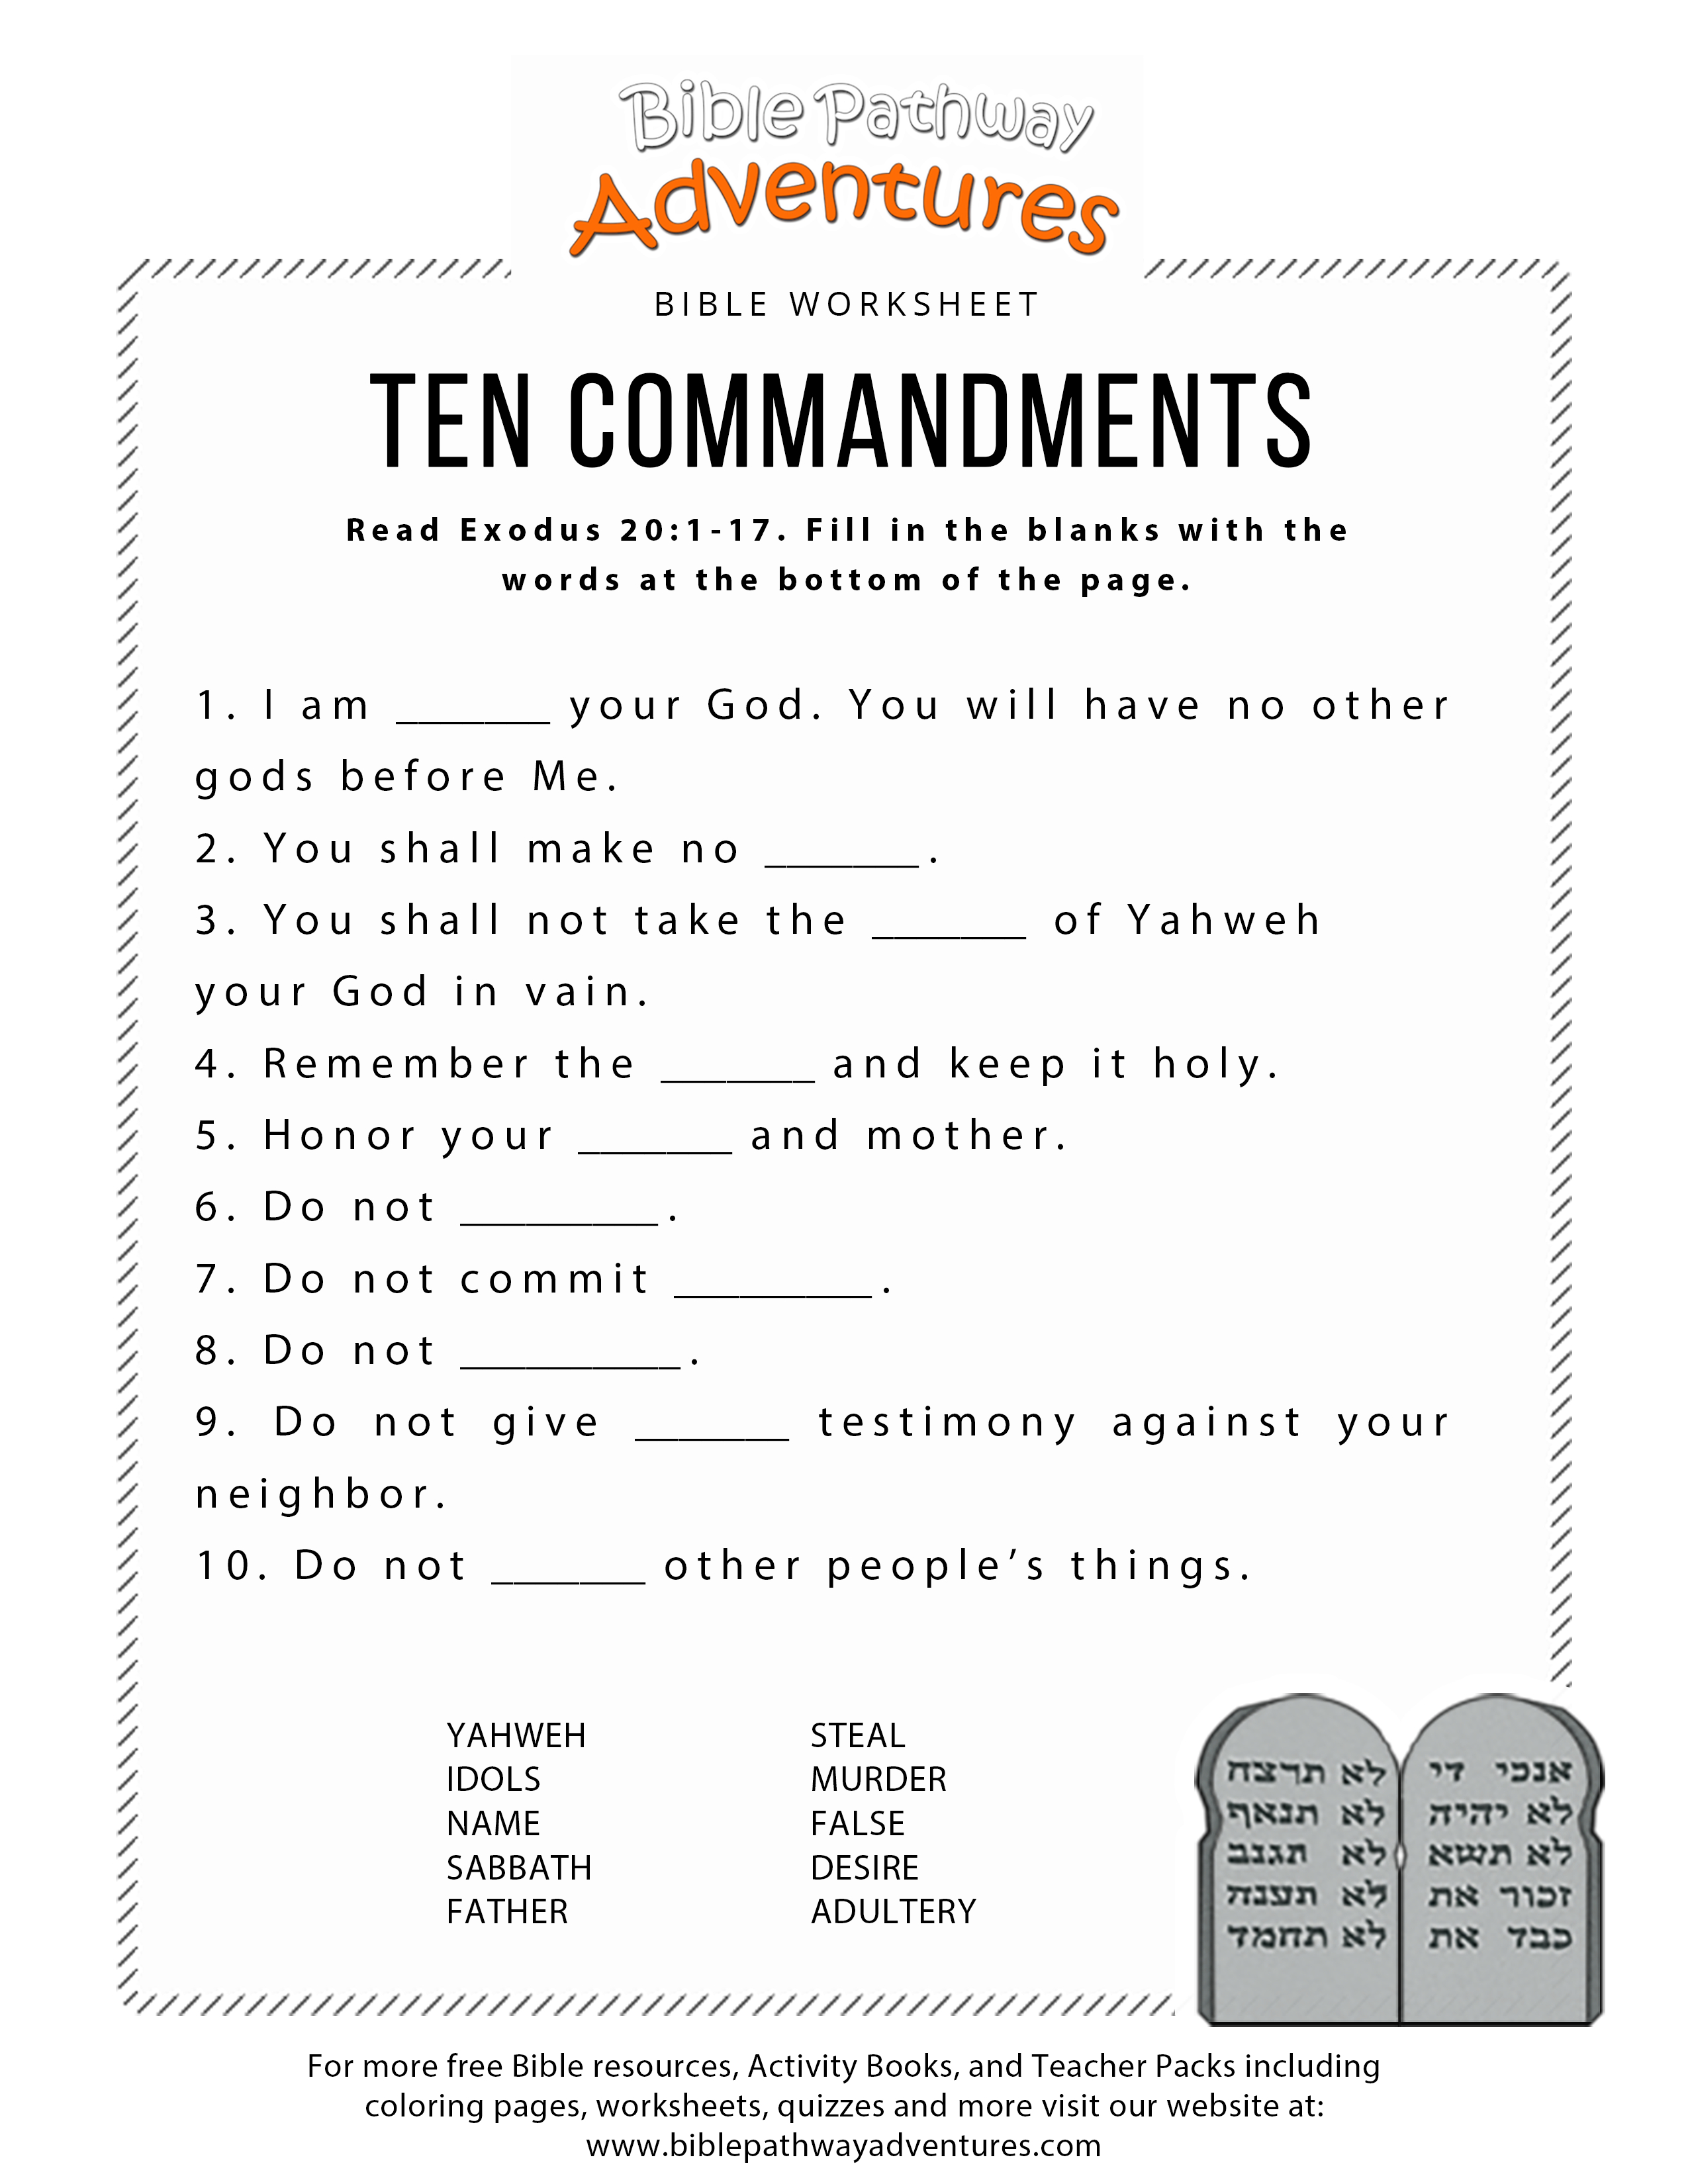 Ten Commandments Worksheet For Kids | Worksheets For Psr | Bible - Free Printable Bible Lessons For Youth